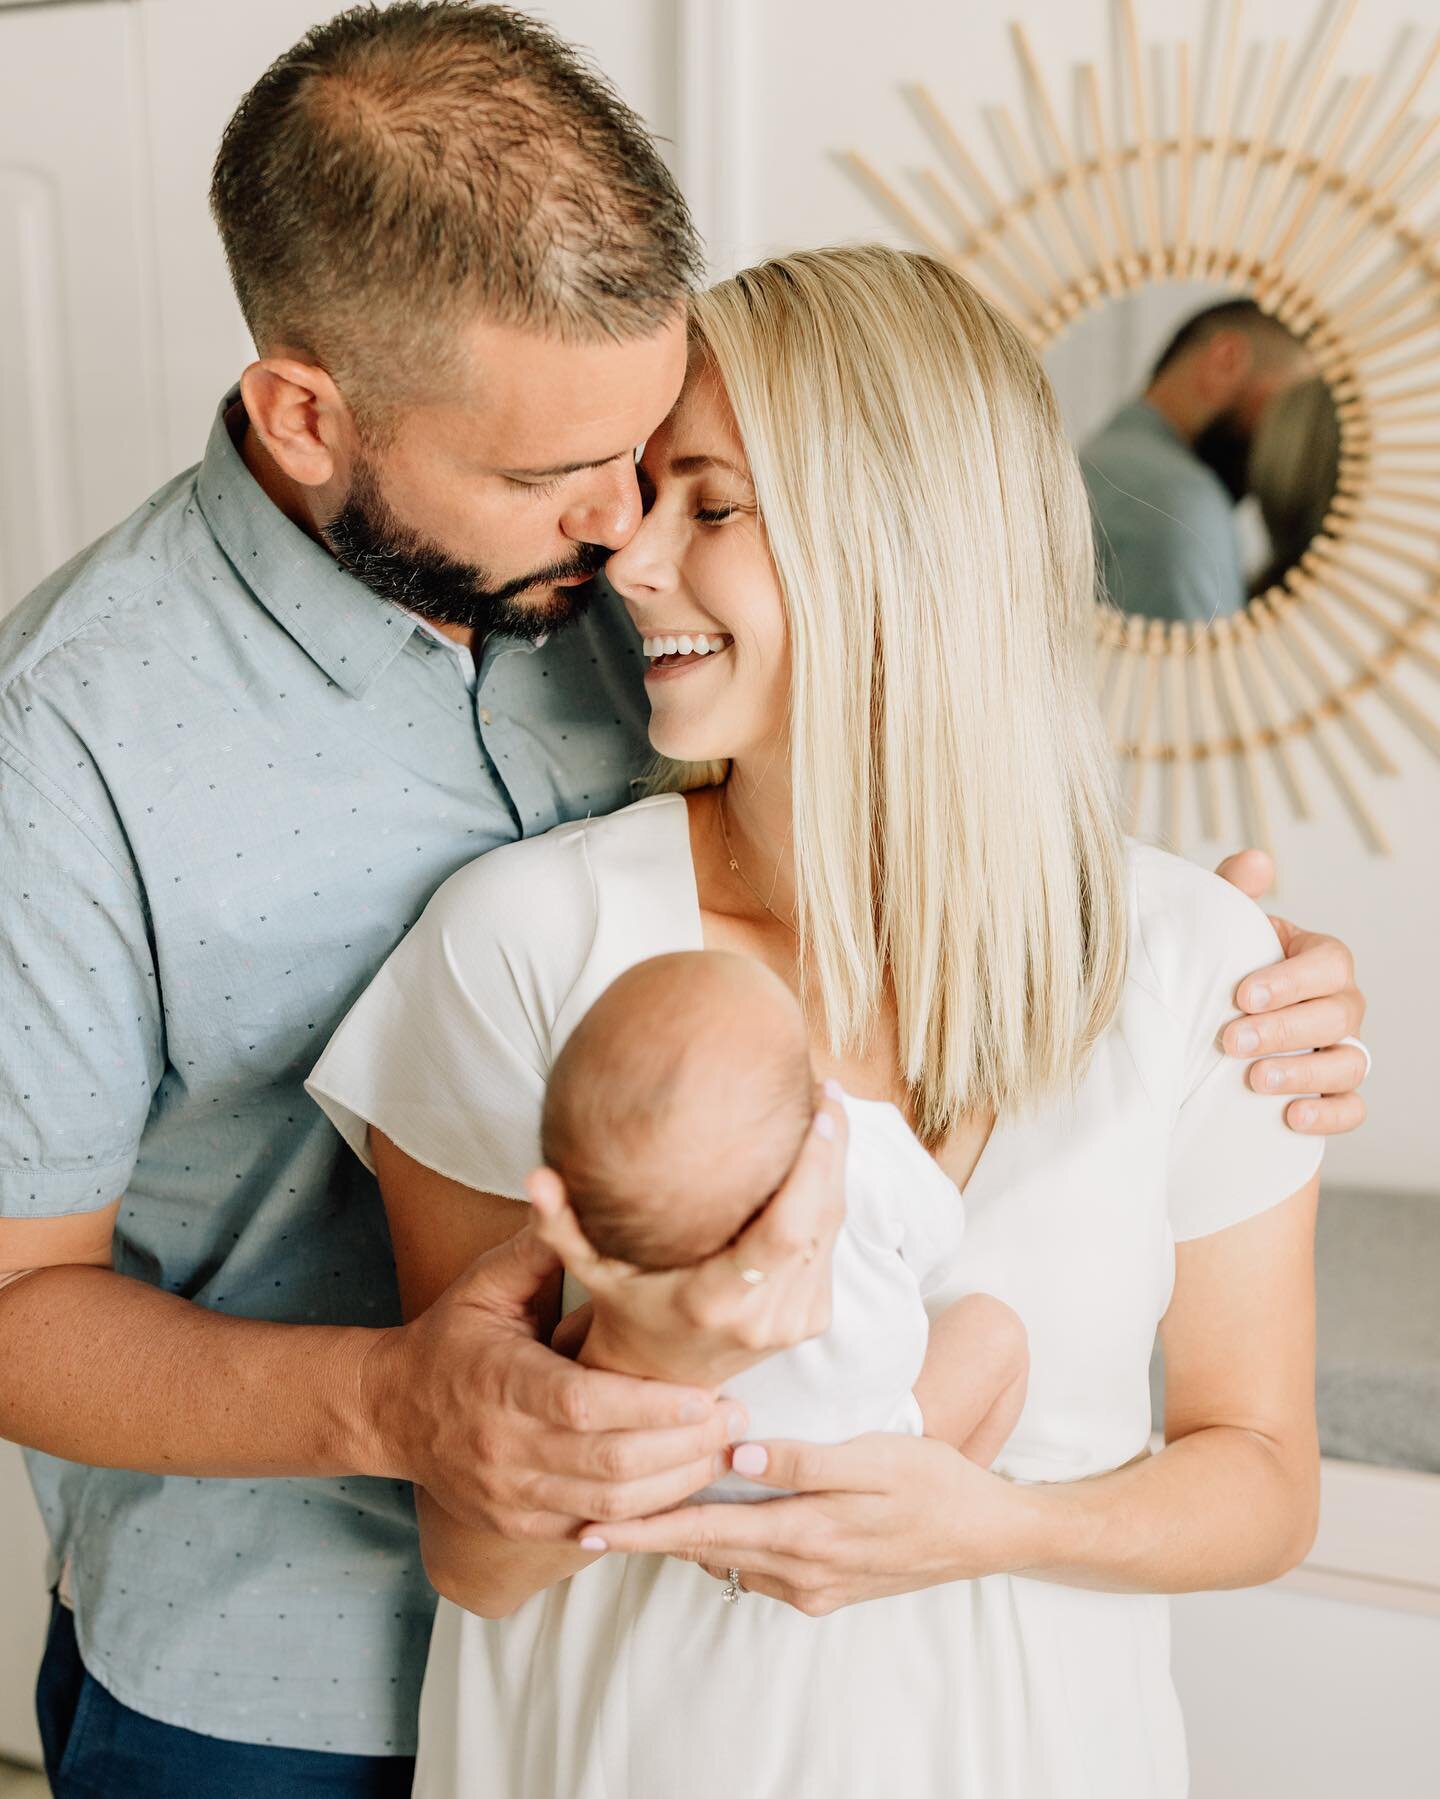 how wonderful life is now that you&rsquo;re in the world 🕊☁️✨🤍 #BrodyRobert ⁣ &bull;&bull;&bull; a few of my favorite snaps from our newborn shoot with @alittlestoryphotography 🎞  #MyWholeWorld #OurLittleFamily #NewbornPhotography